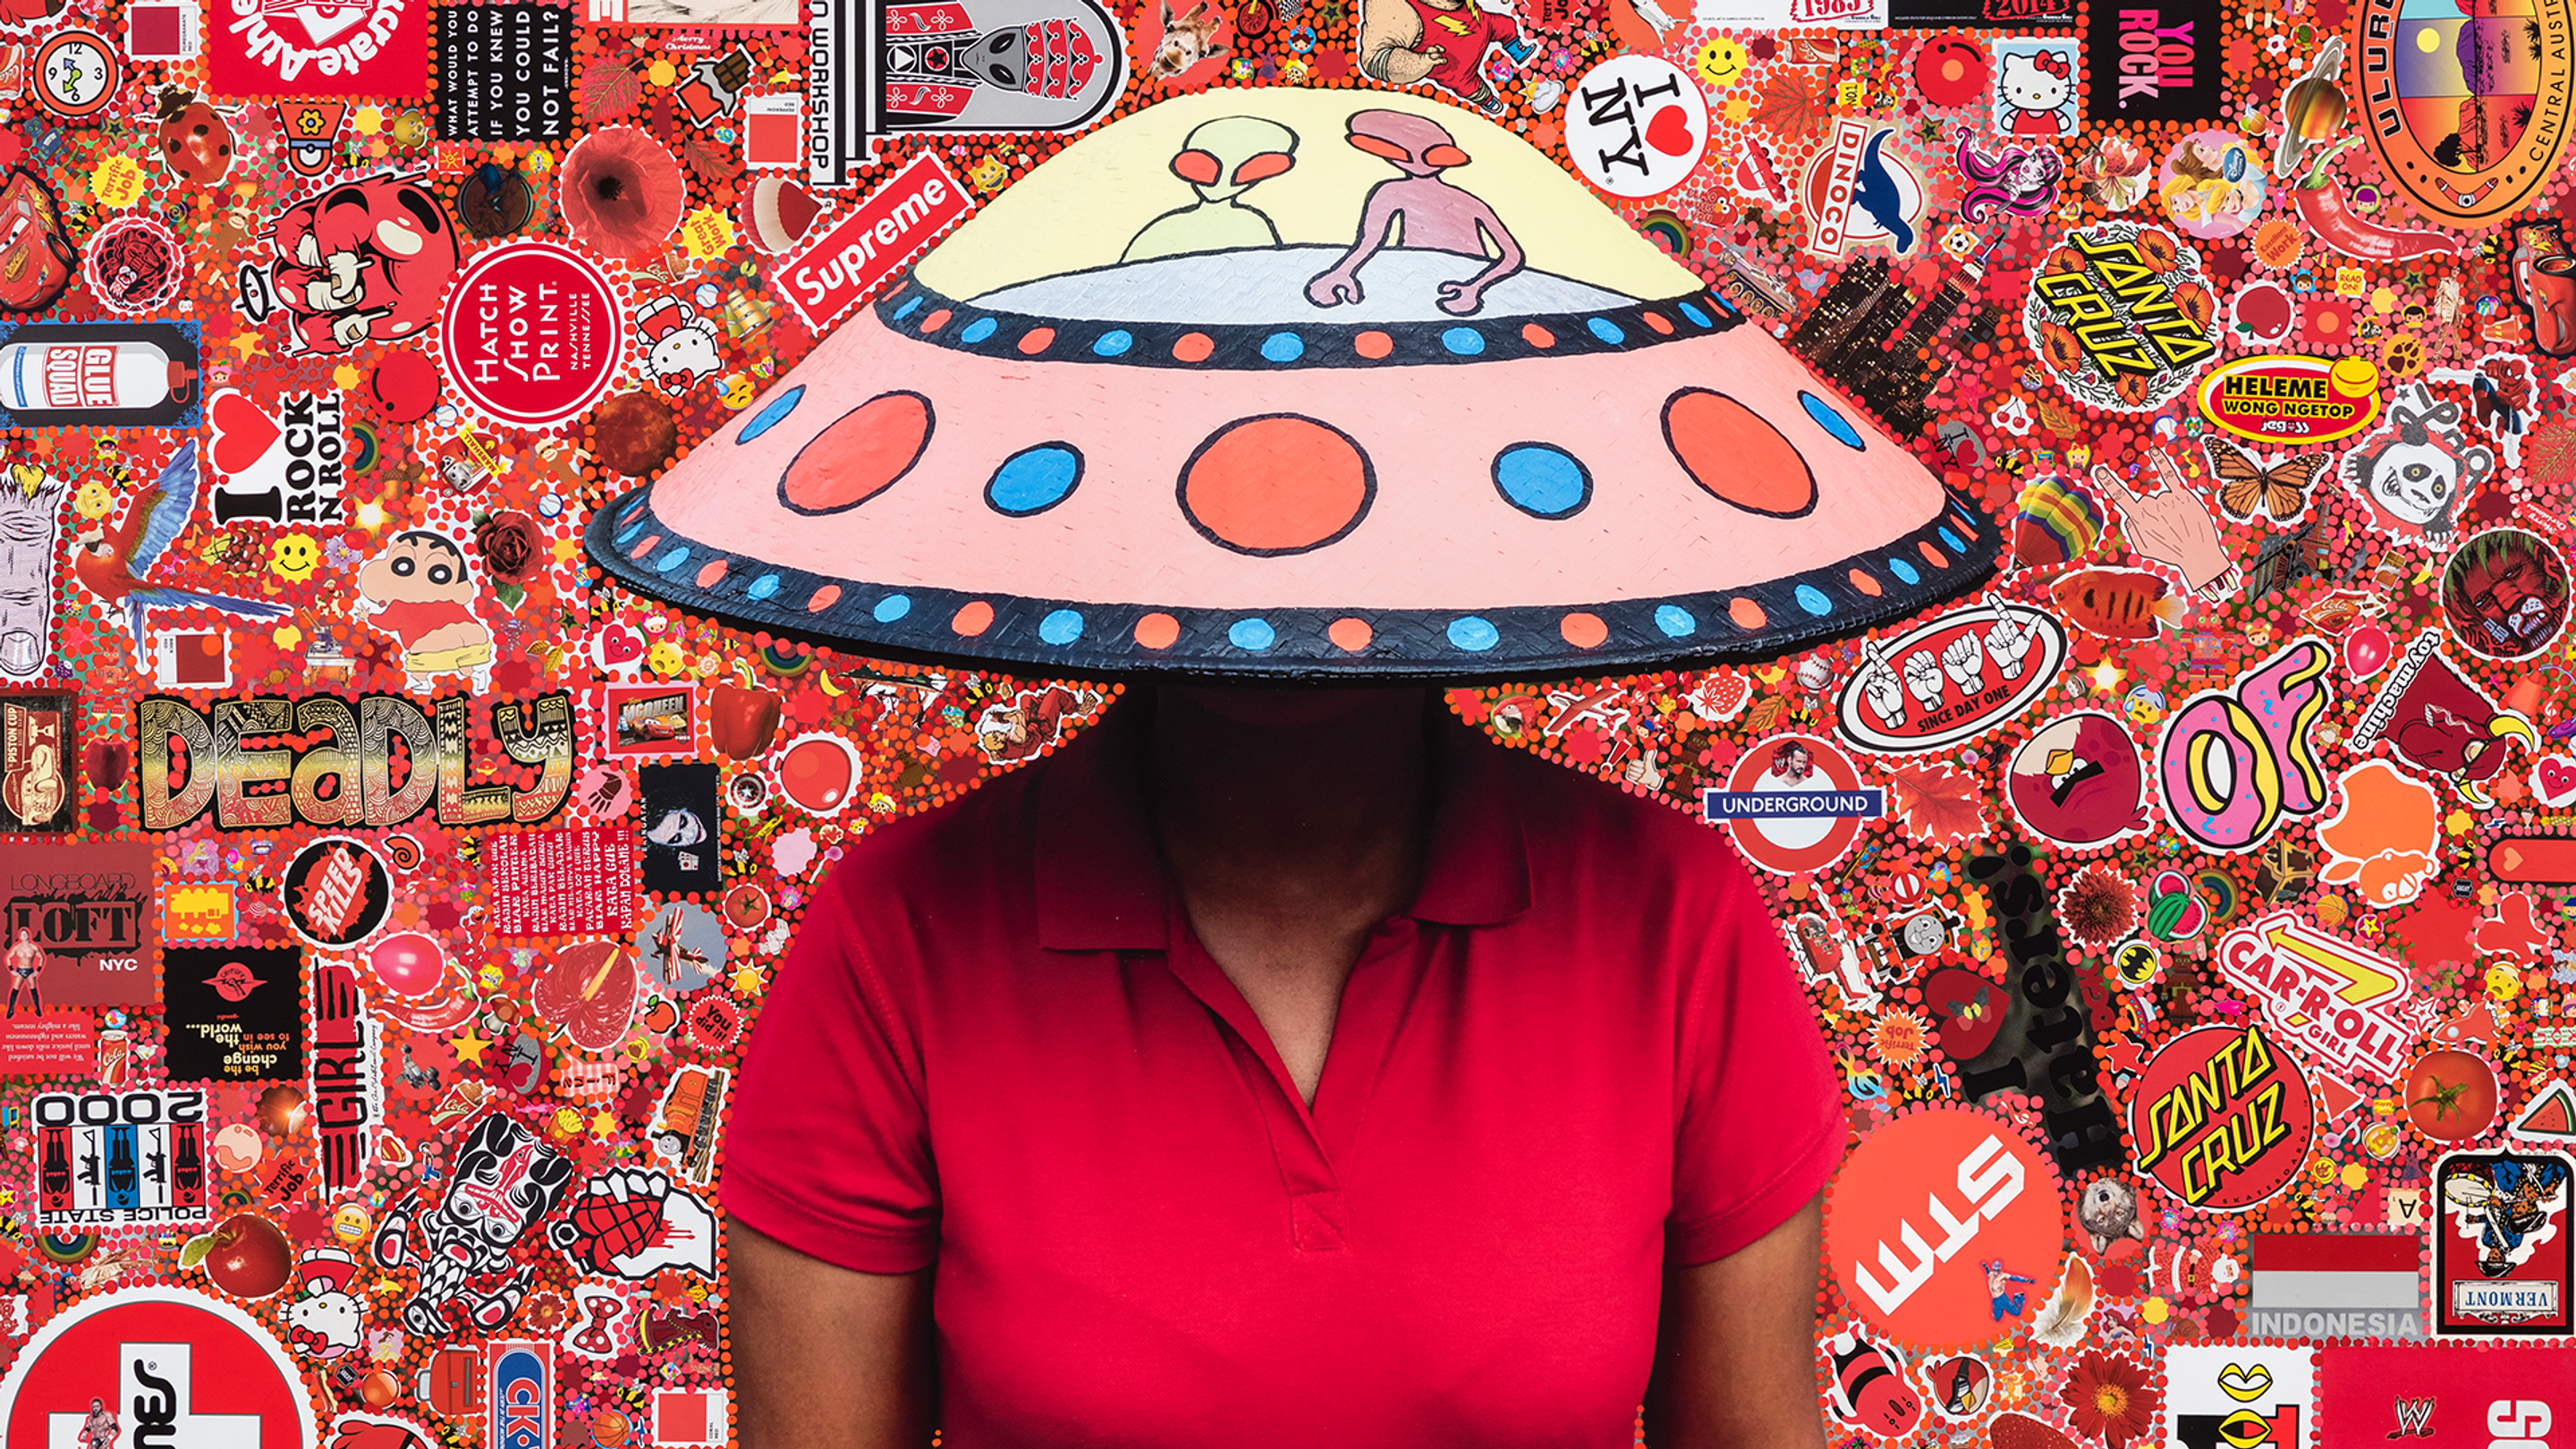 A person wears a conical hat painted like a UFO with aliens. The background is a mish mash of similarly coloured pop culture references.